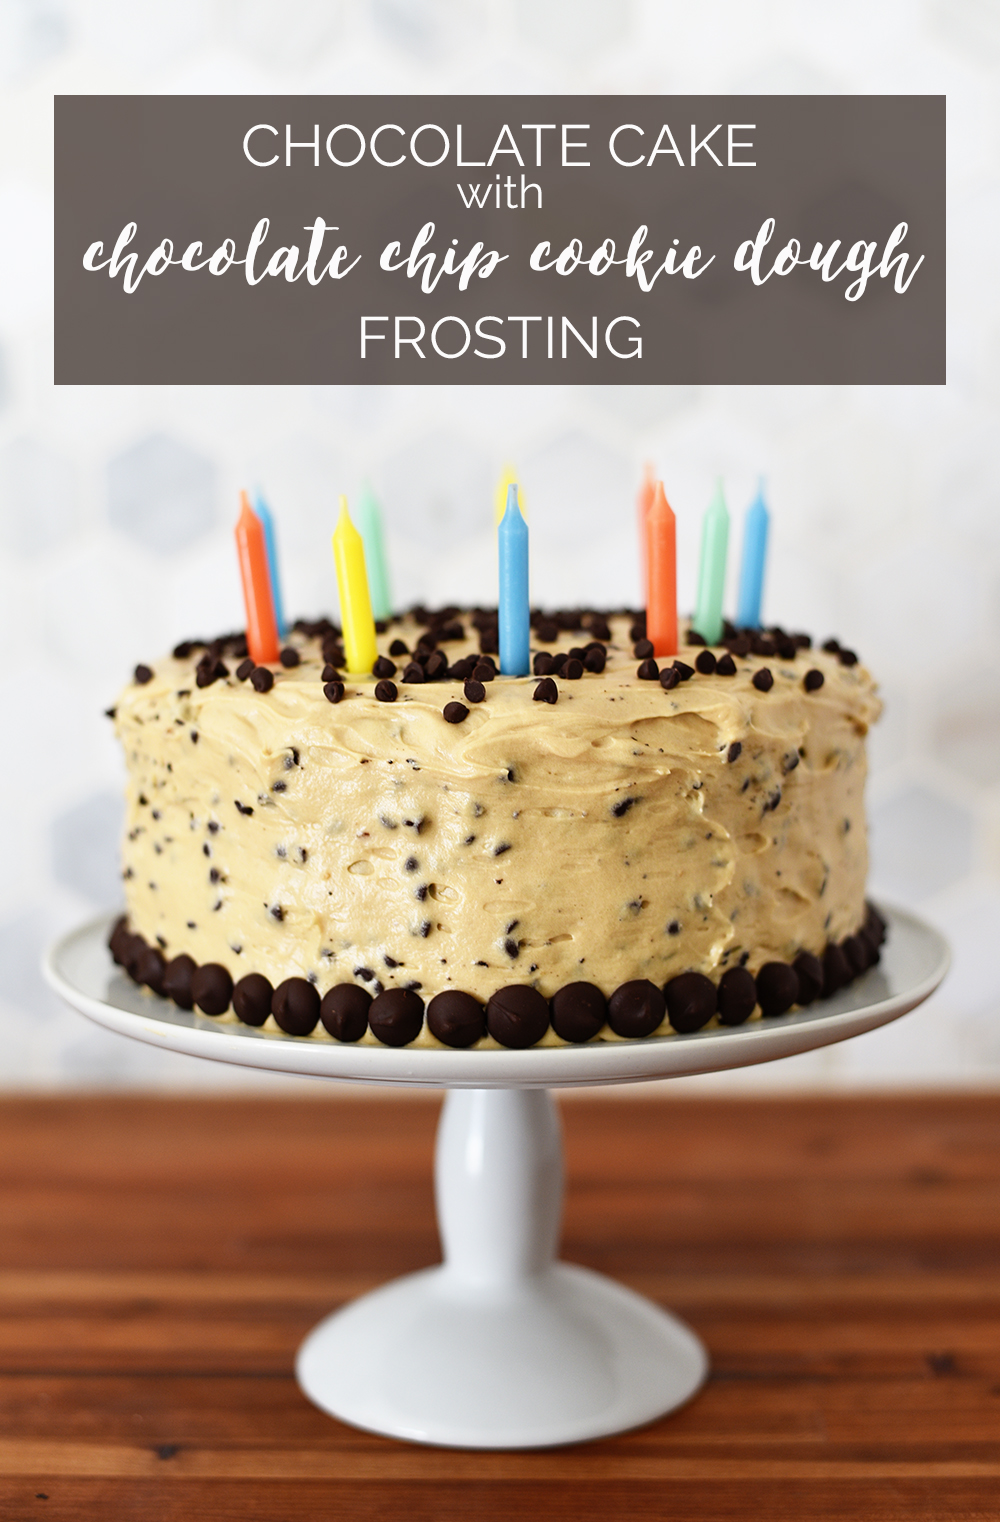 Chocolate Cake with Chocolate Chip Cookie Dough Frosting